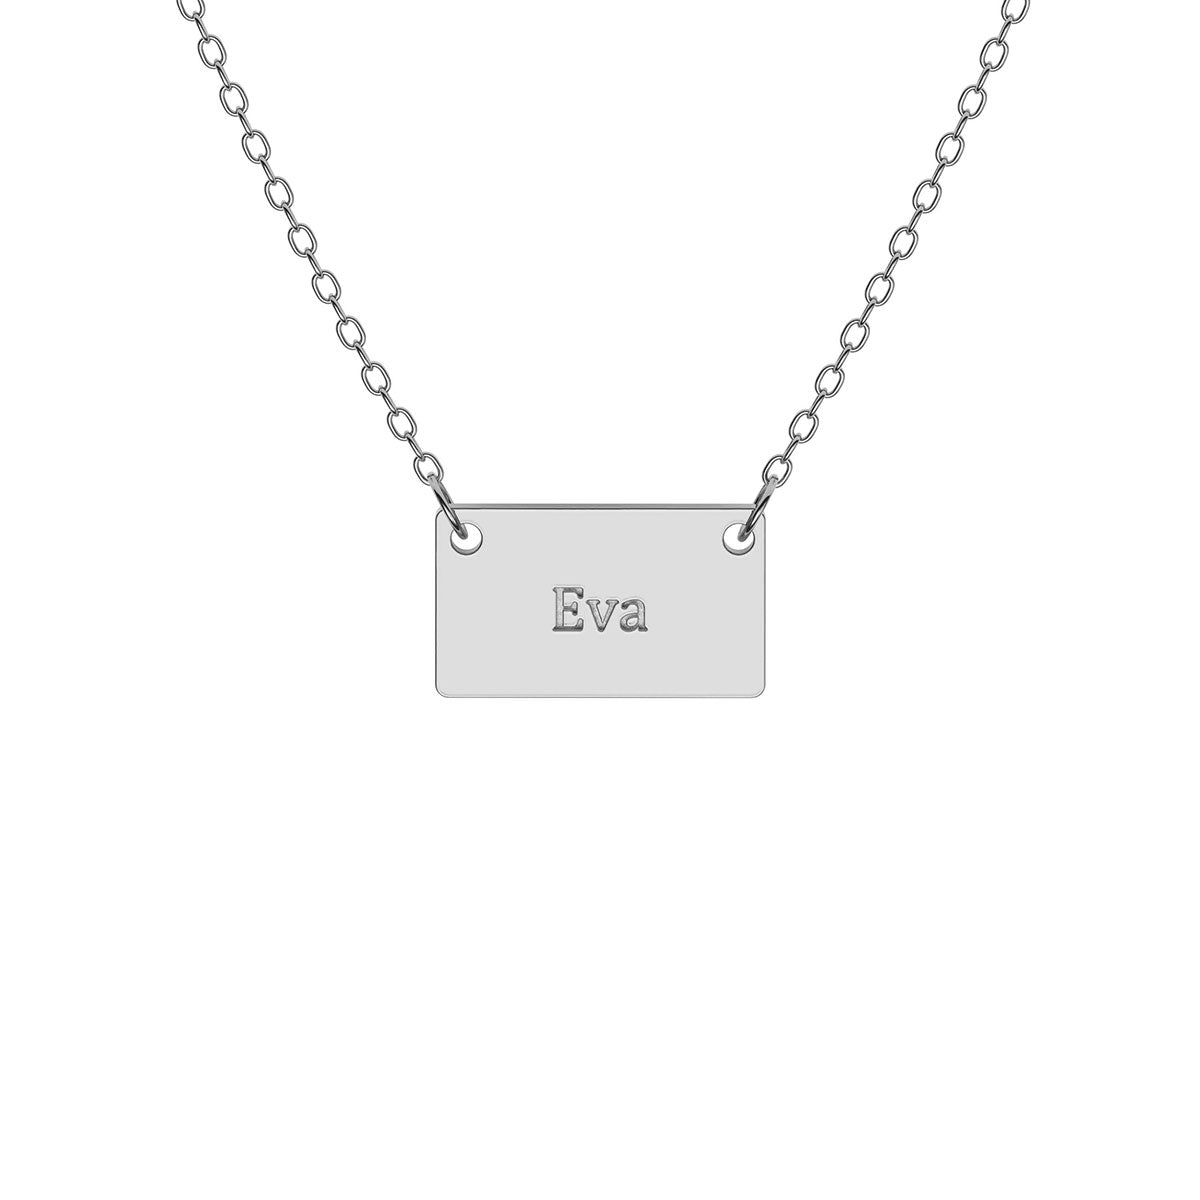 Mini Rectangular Necklace with Name Engraving